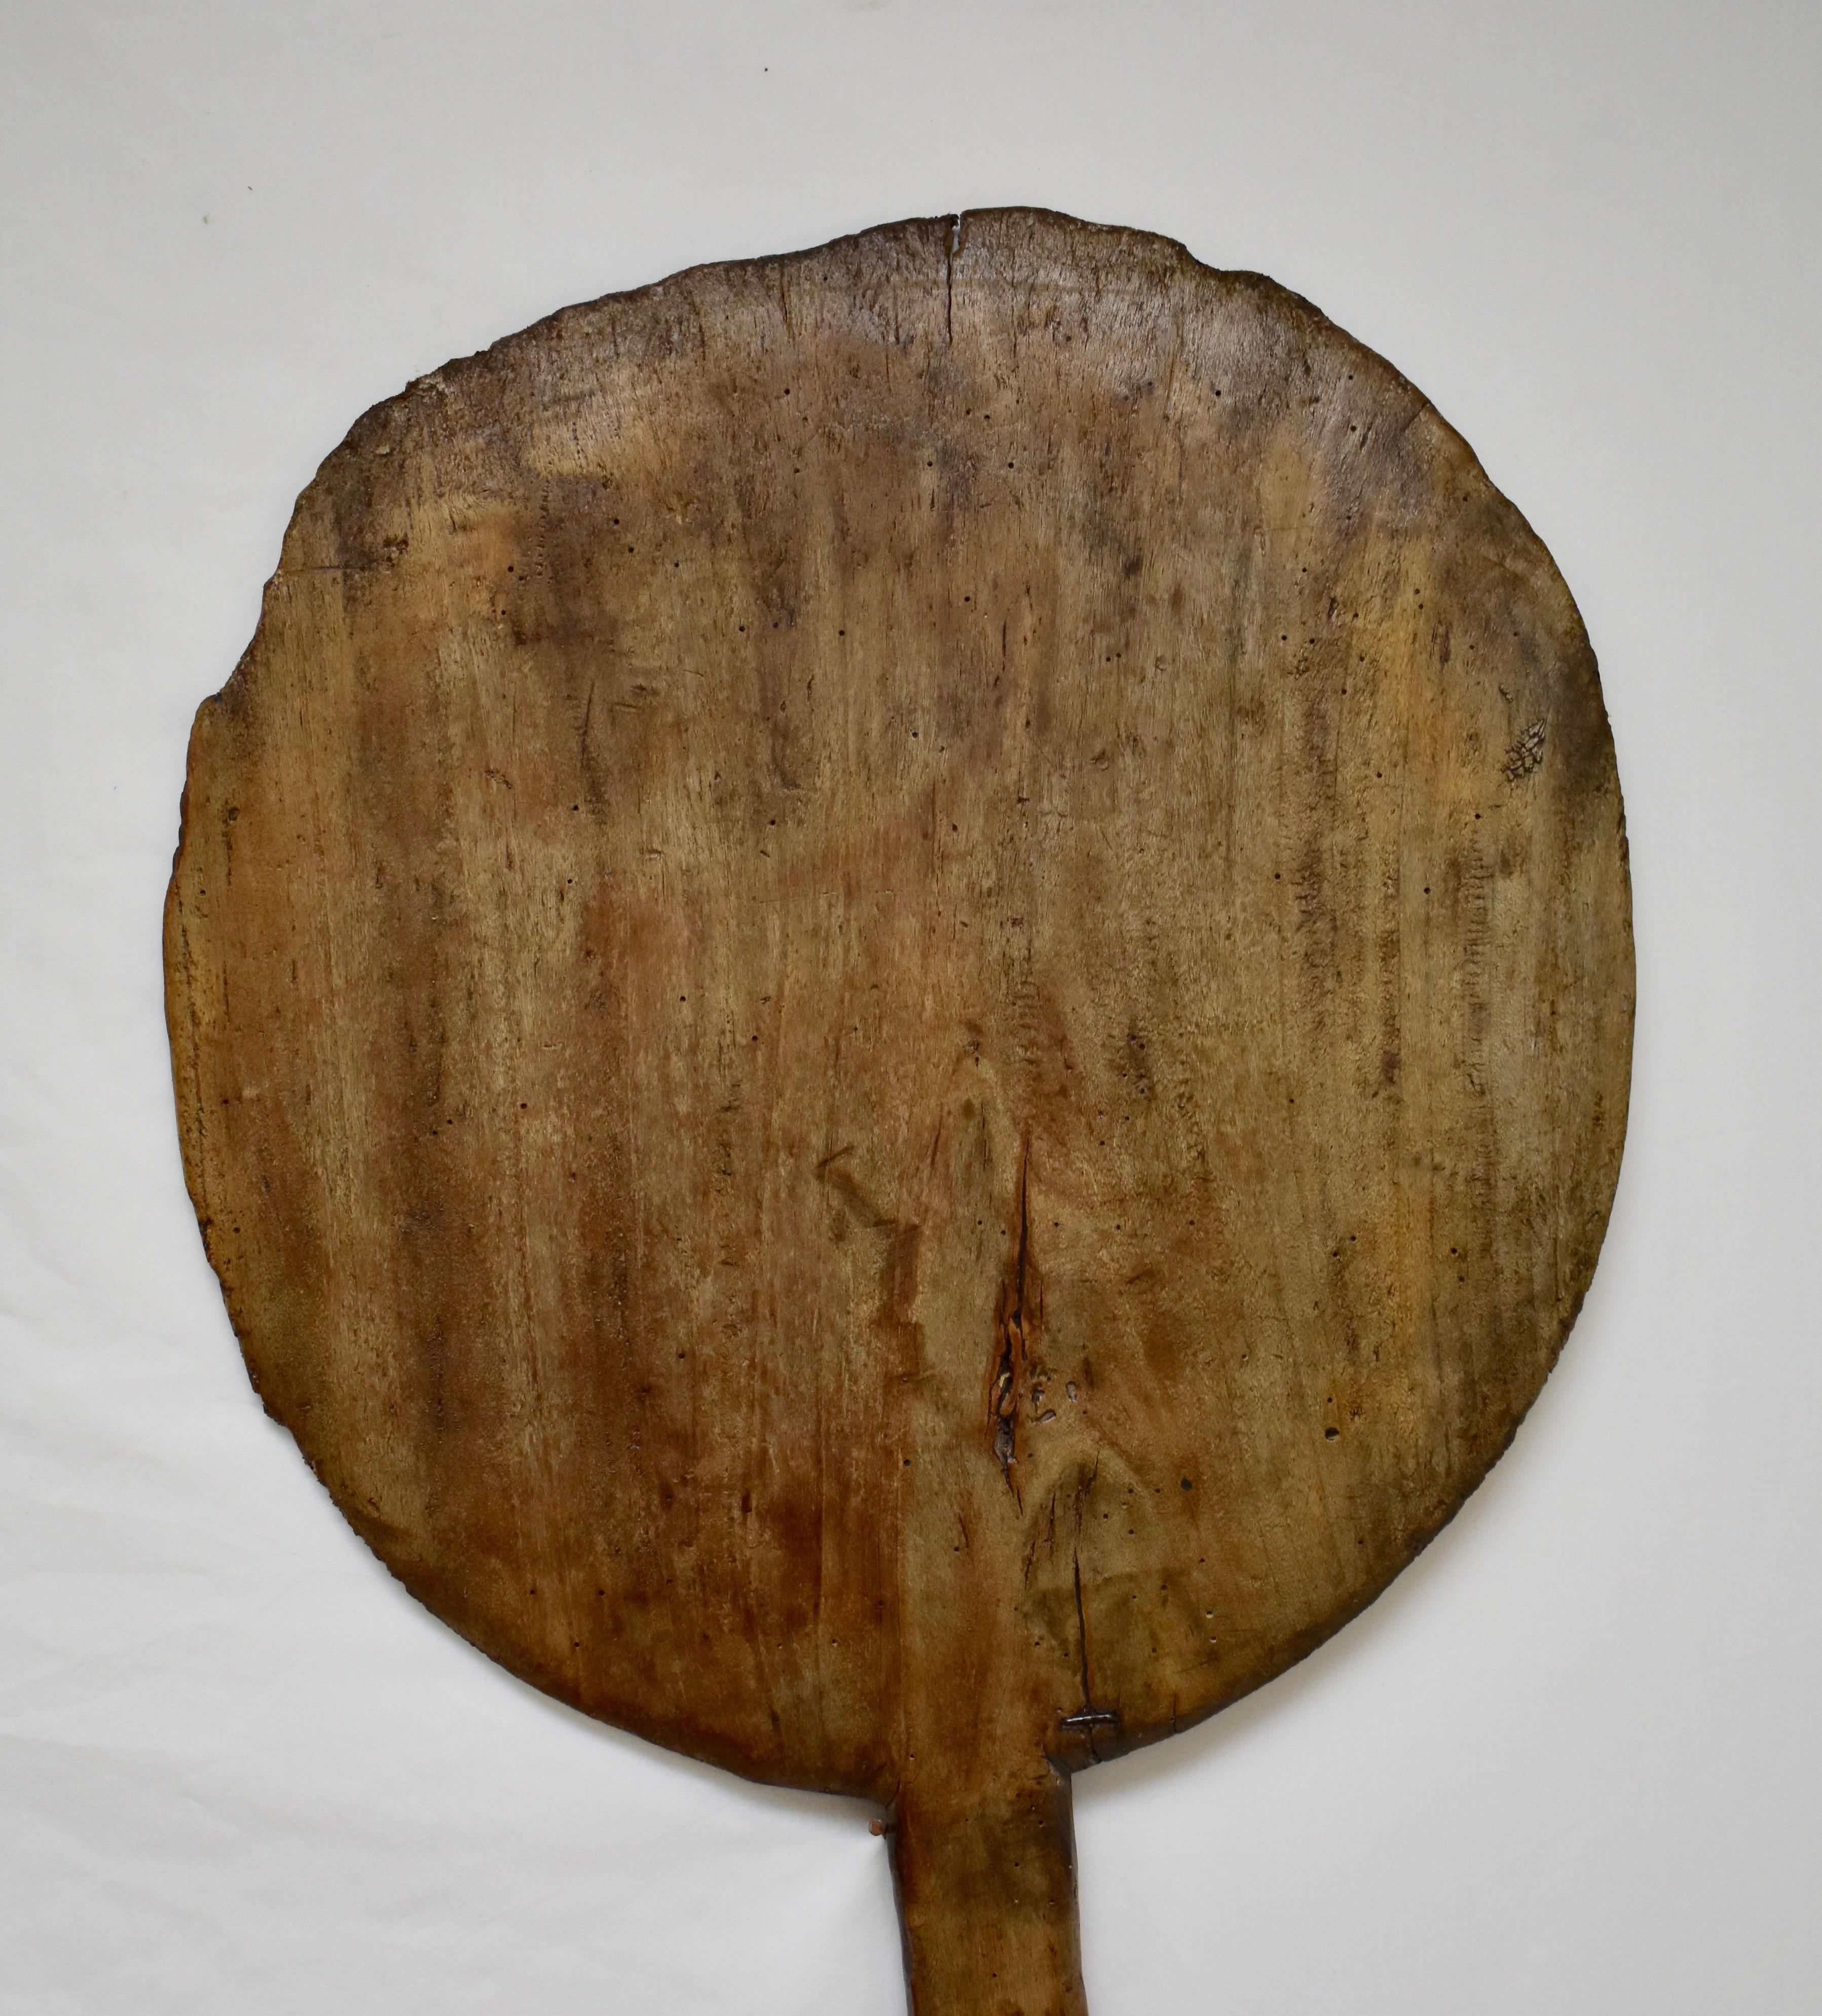 Much lighter in weight than its oak counterparts, this vintage fruitwood bread peel is also hand-carved from a single board. The wide shaft is worn smooth and the paddle has minor chips to the lip with a nice stapled repair near the shaft end.